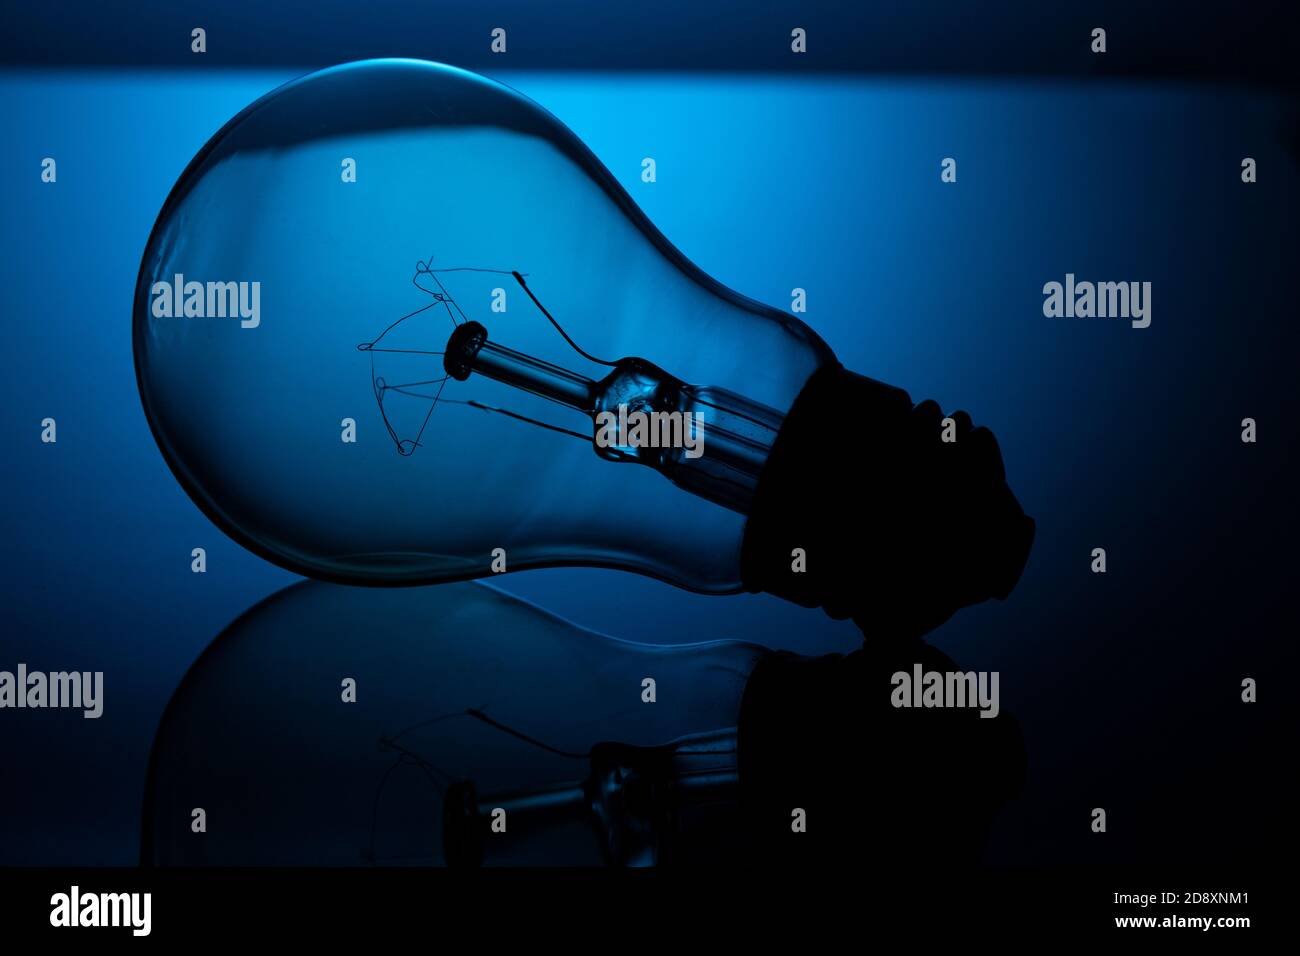 An incandescent light bulb lies on reflective glass, against a blue background, in a dark key. Stock Photo